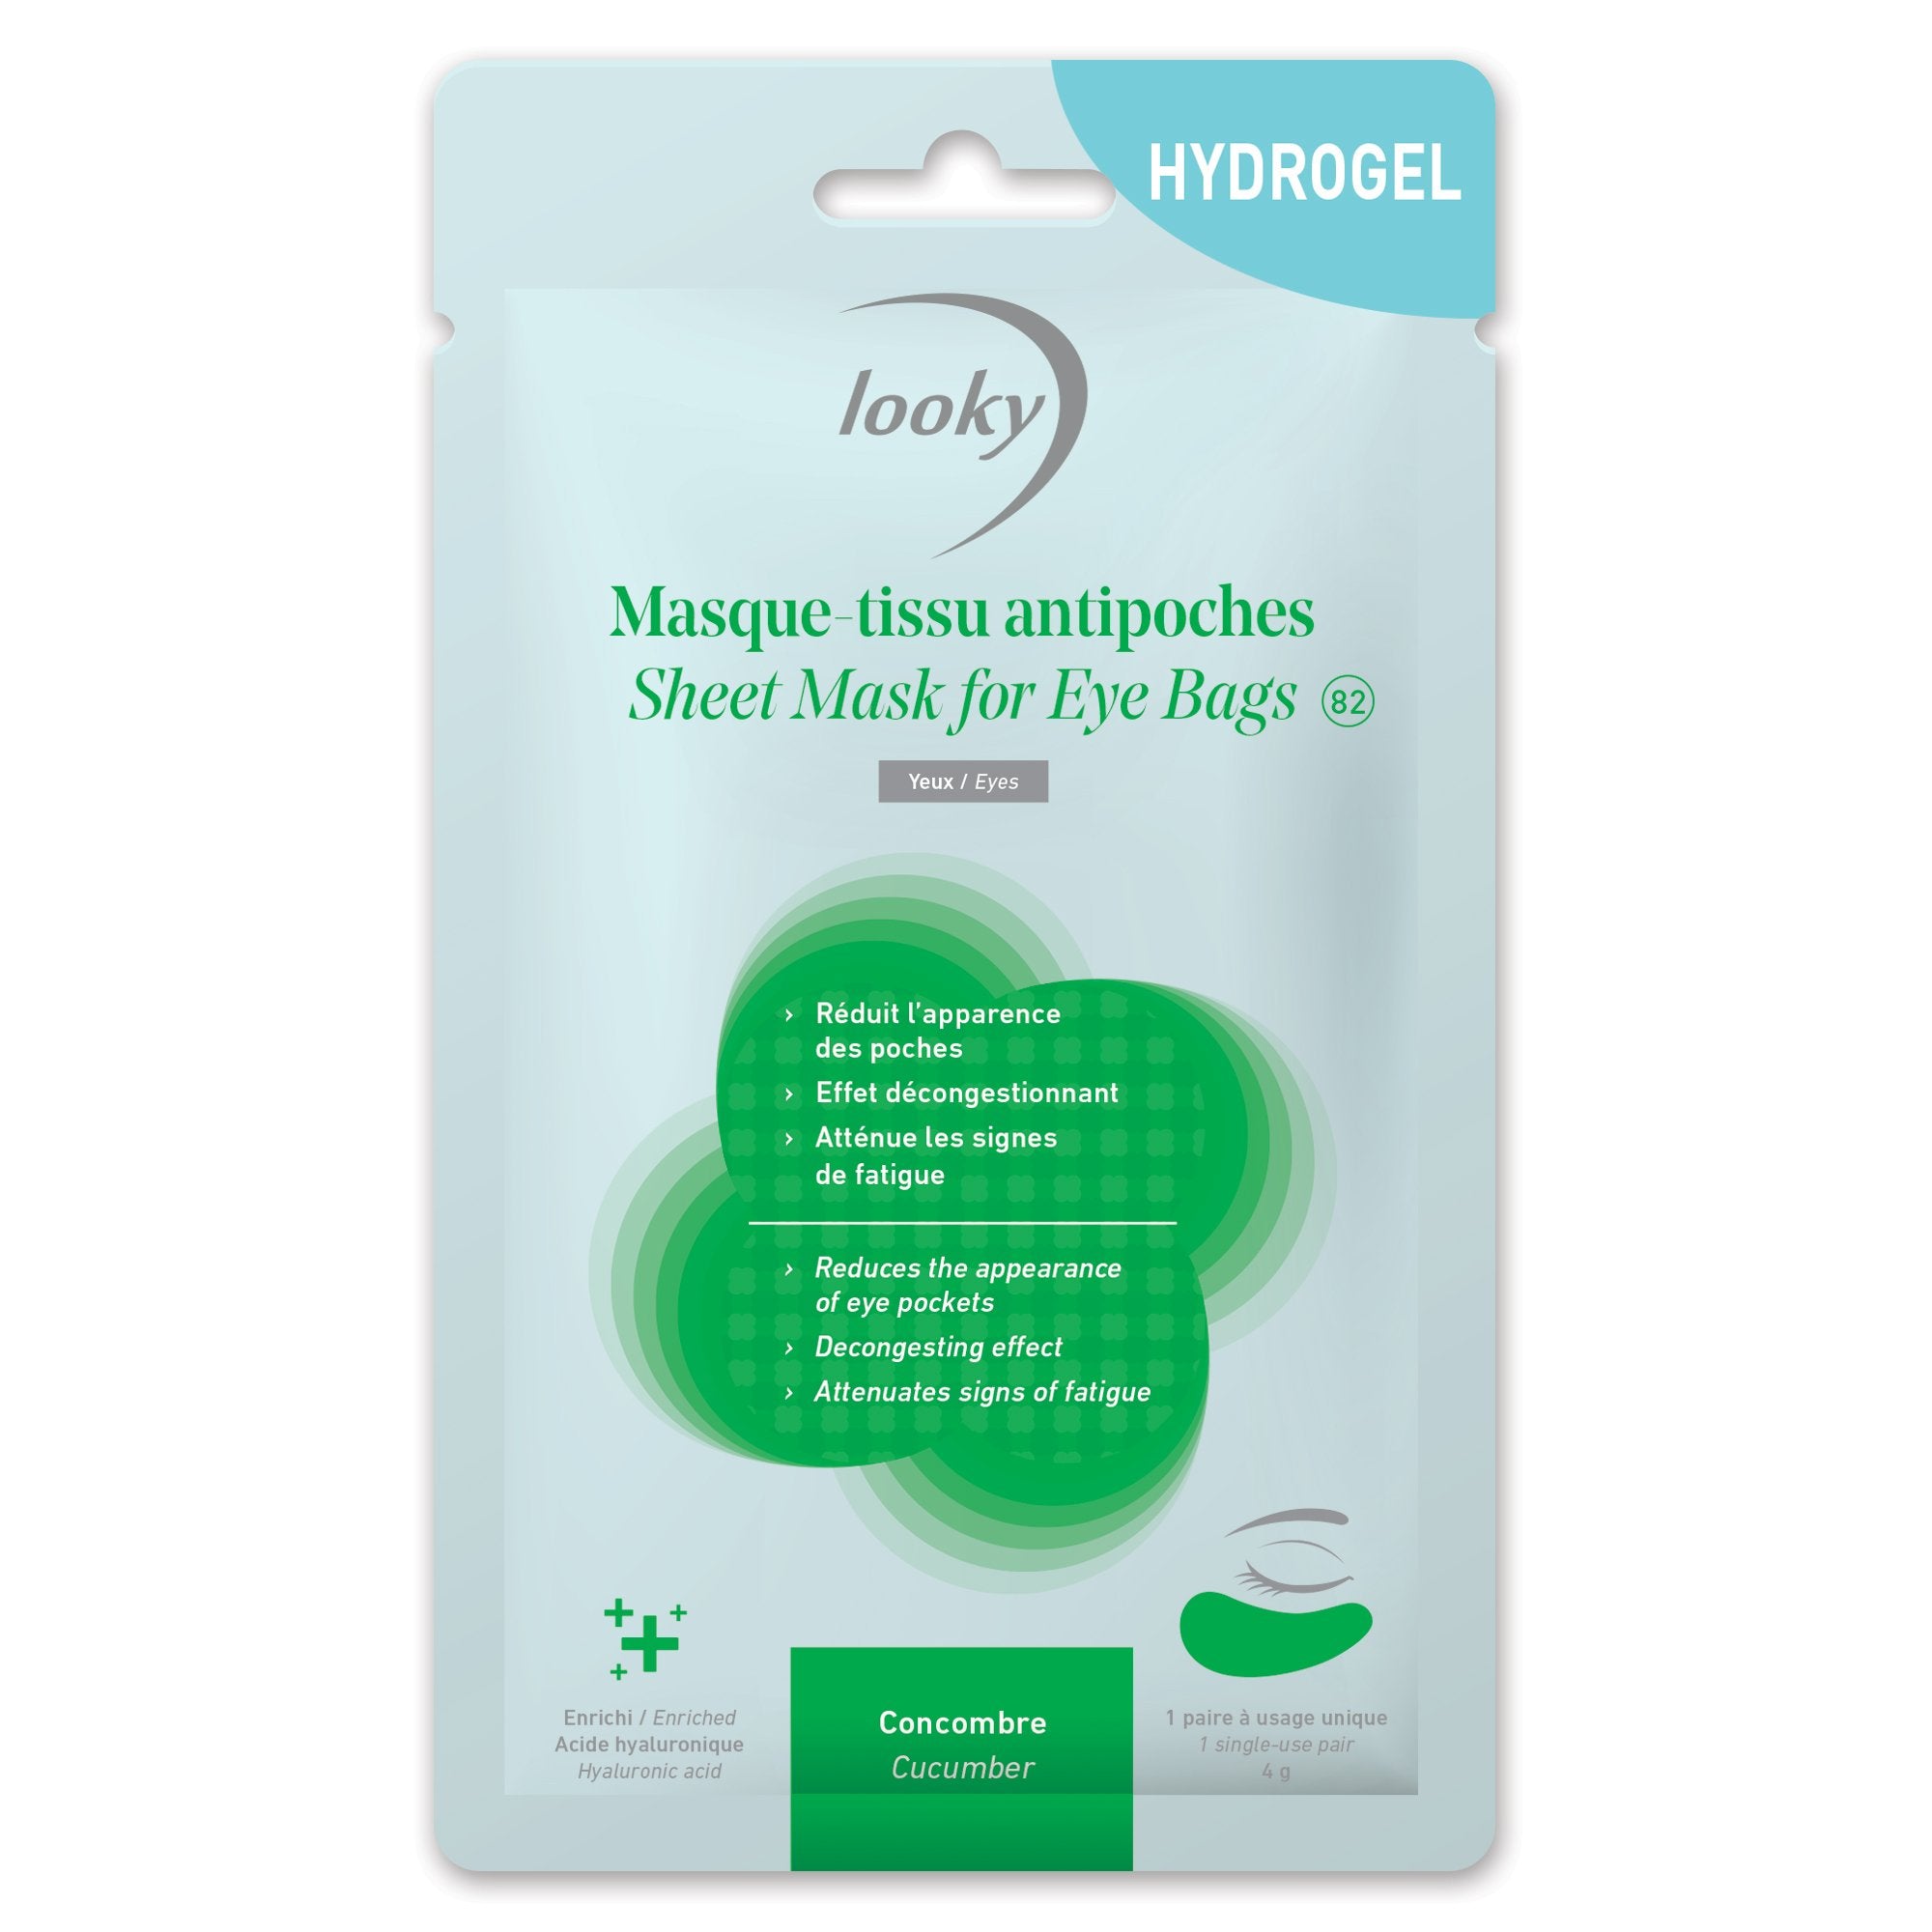 Looky  Hydrogel Mask - Anti-puffiness #82